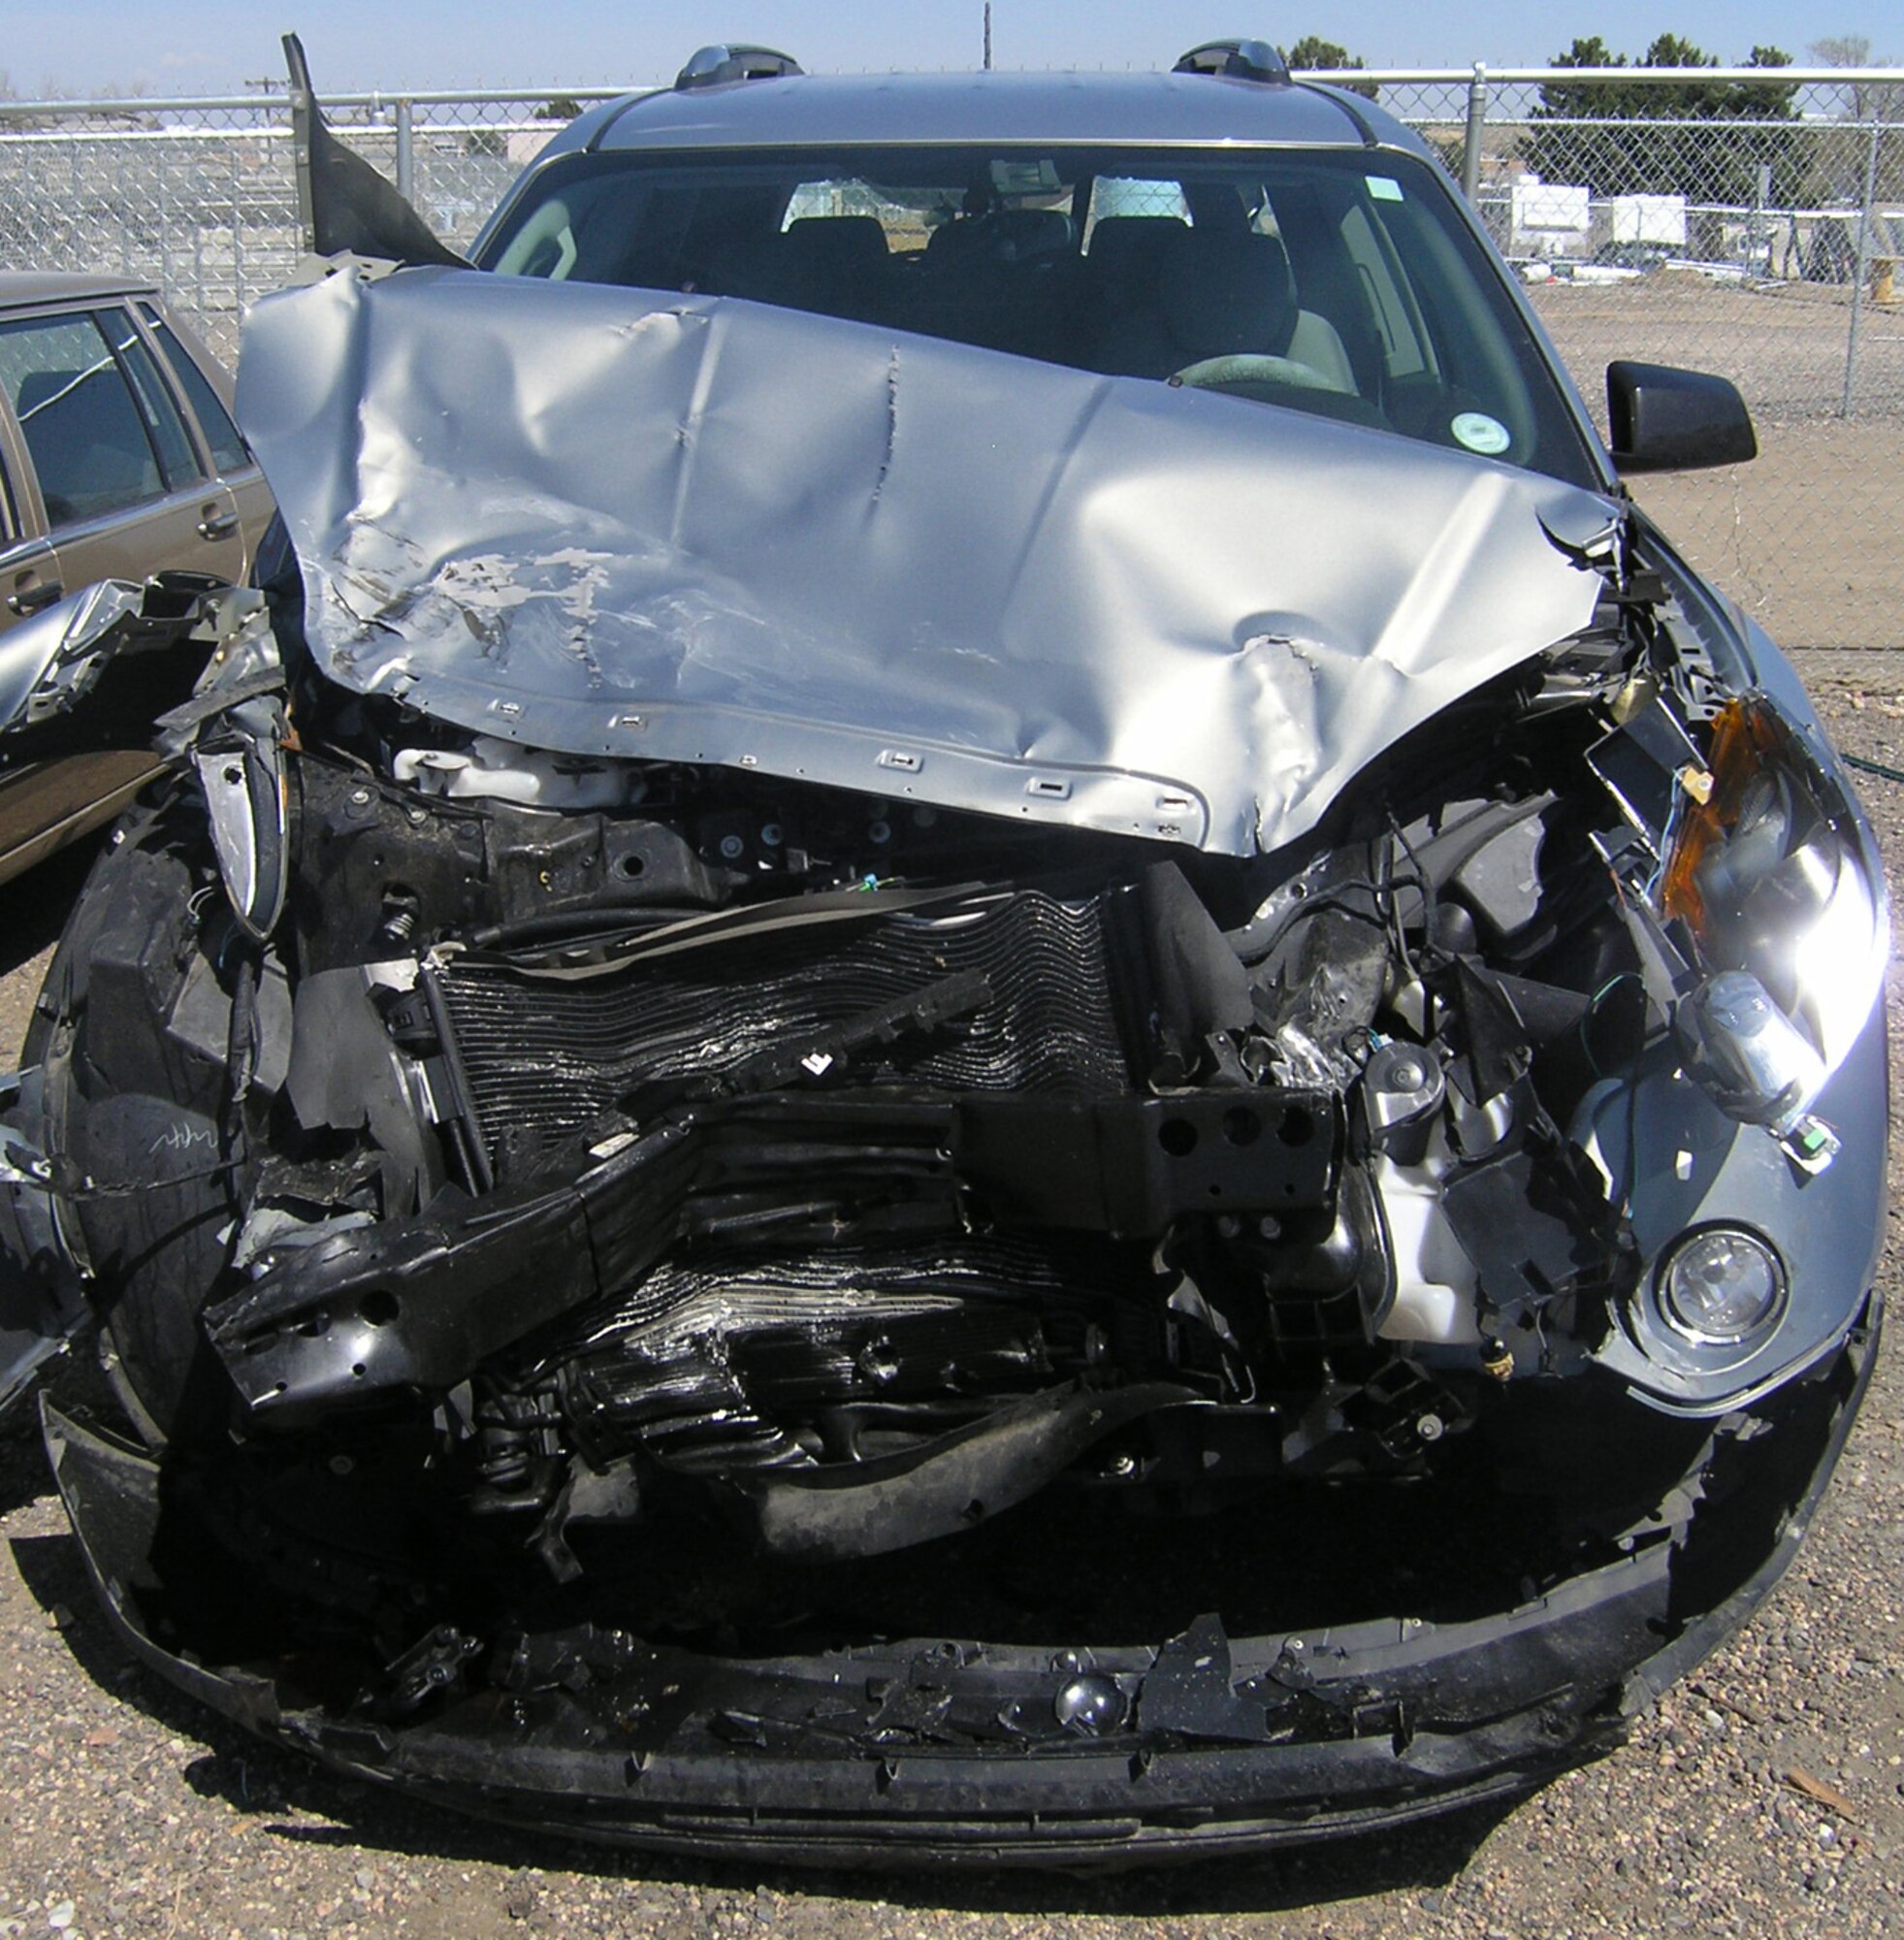 BUCKLEY AIR FORCE BASE, Colo. -- An officer, from the 460th Space Wing, and her children survived a head-on crash with another vehicle that ran a red light in Parker, Colo., April 22. The family walked away with a few bruises because they were wearing their seatbelts. (Courtesy photo)